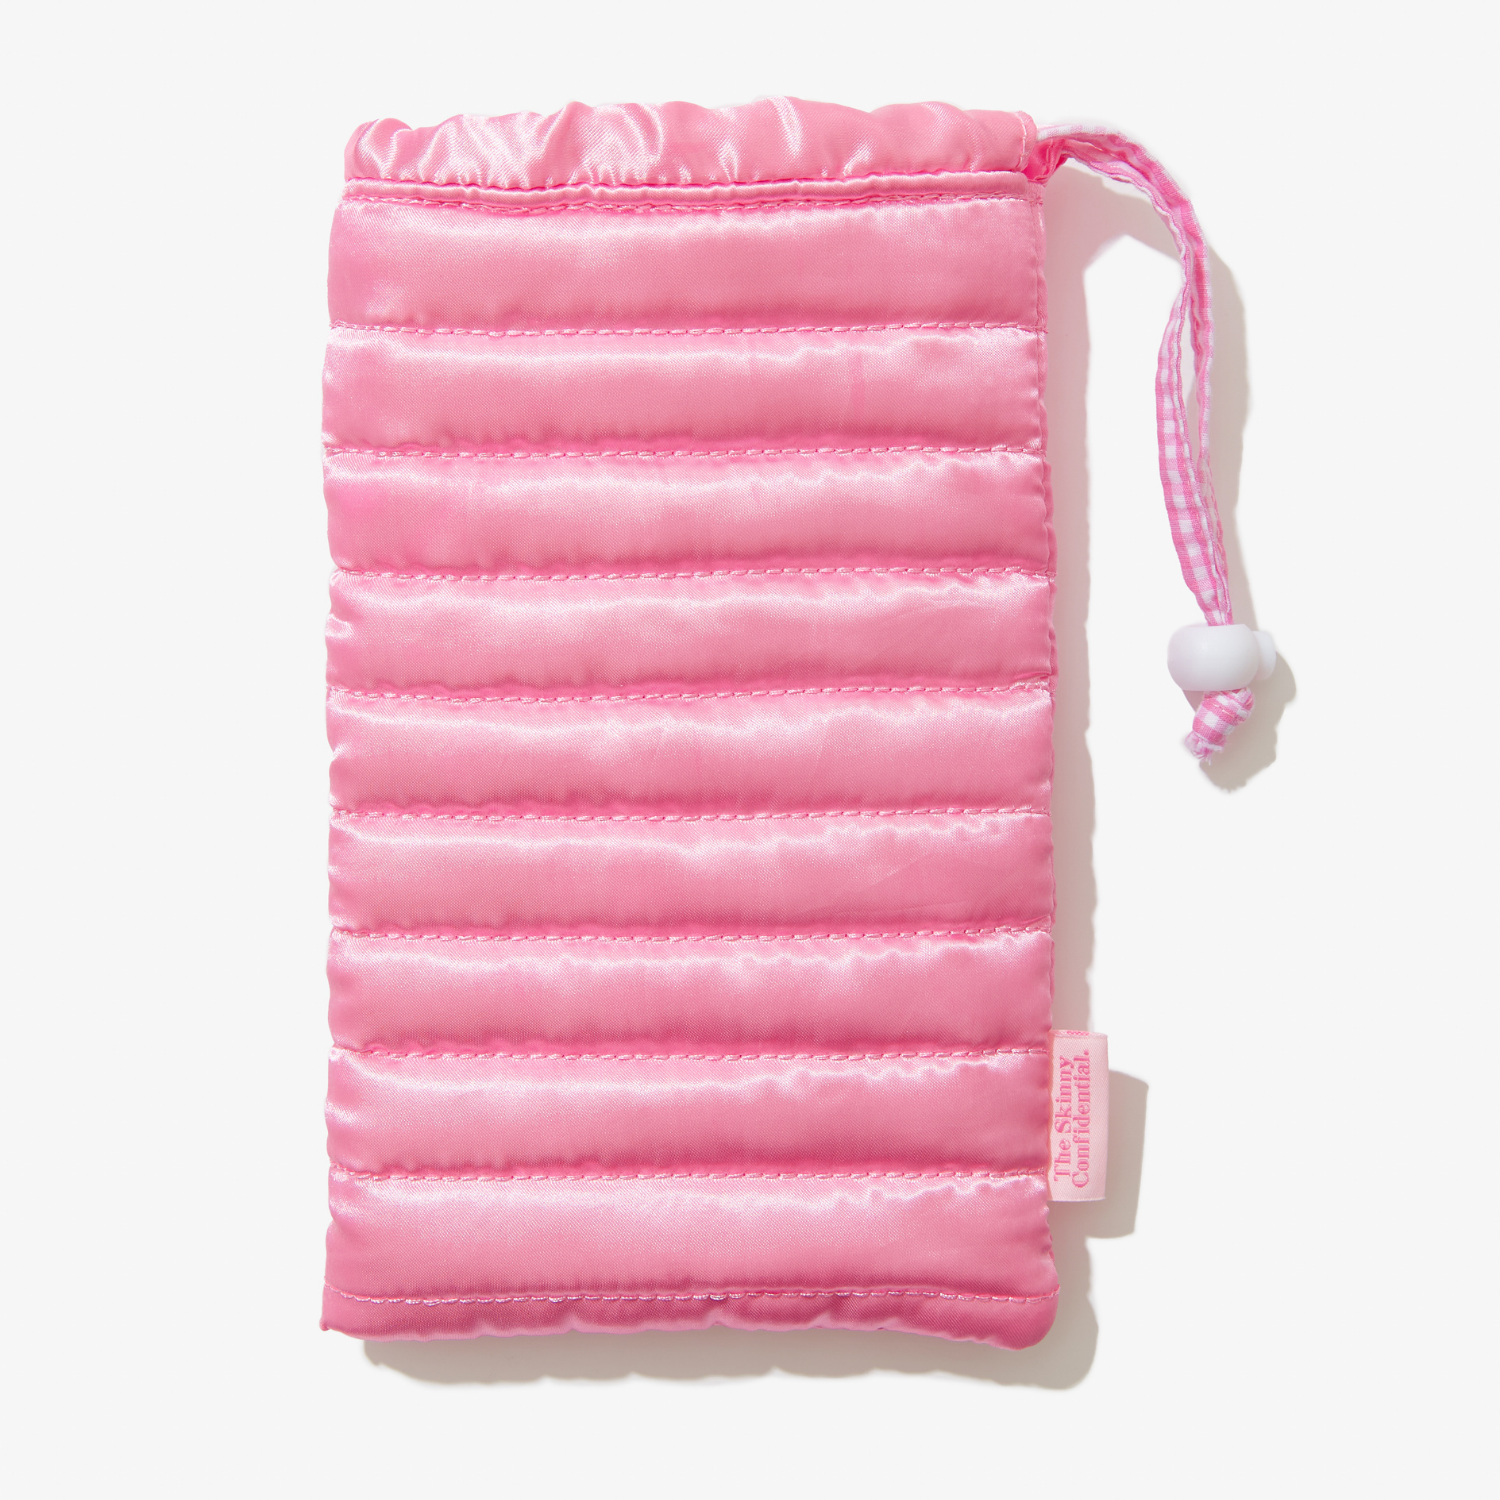 The Skinny Confidential Sleeping Bag Shop At Exclusive Beauty